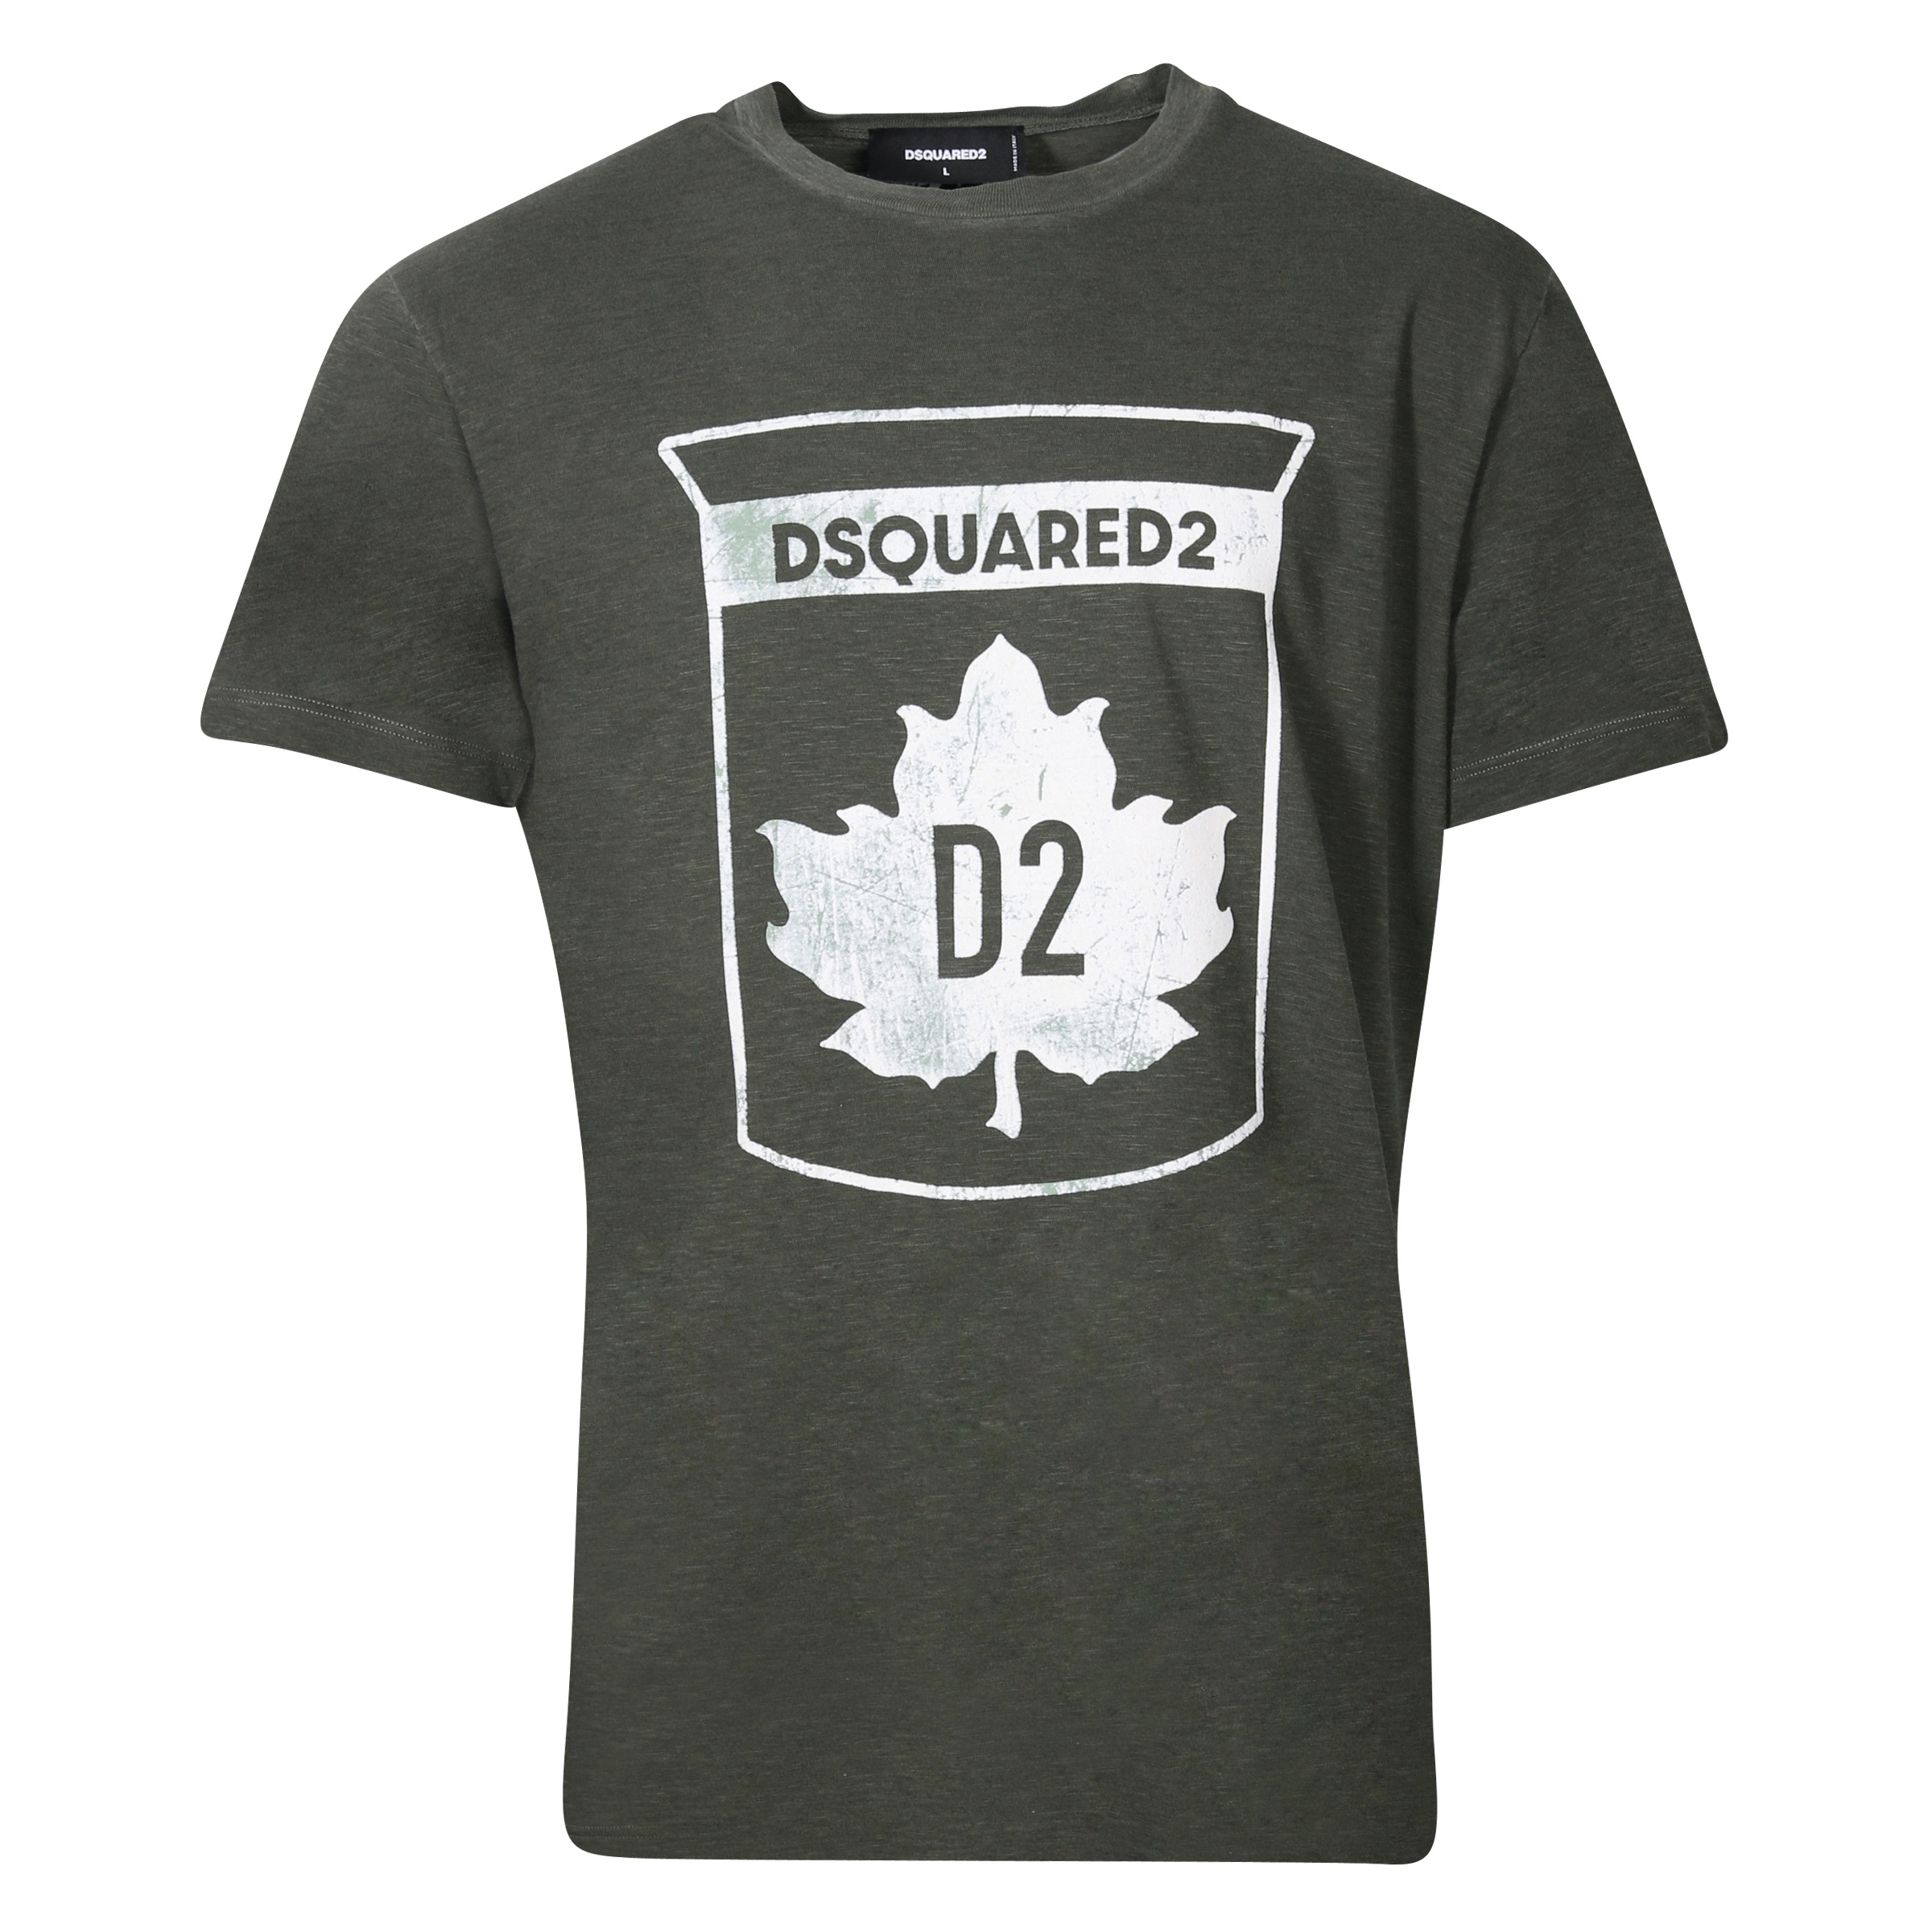 Dsquared T-Shirt Olive Printed